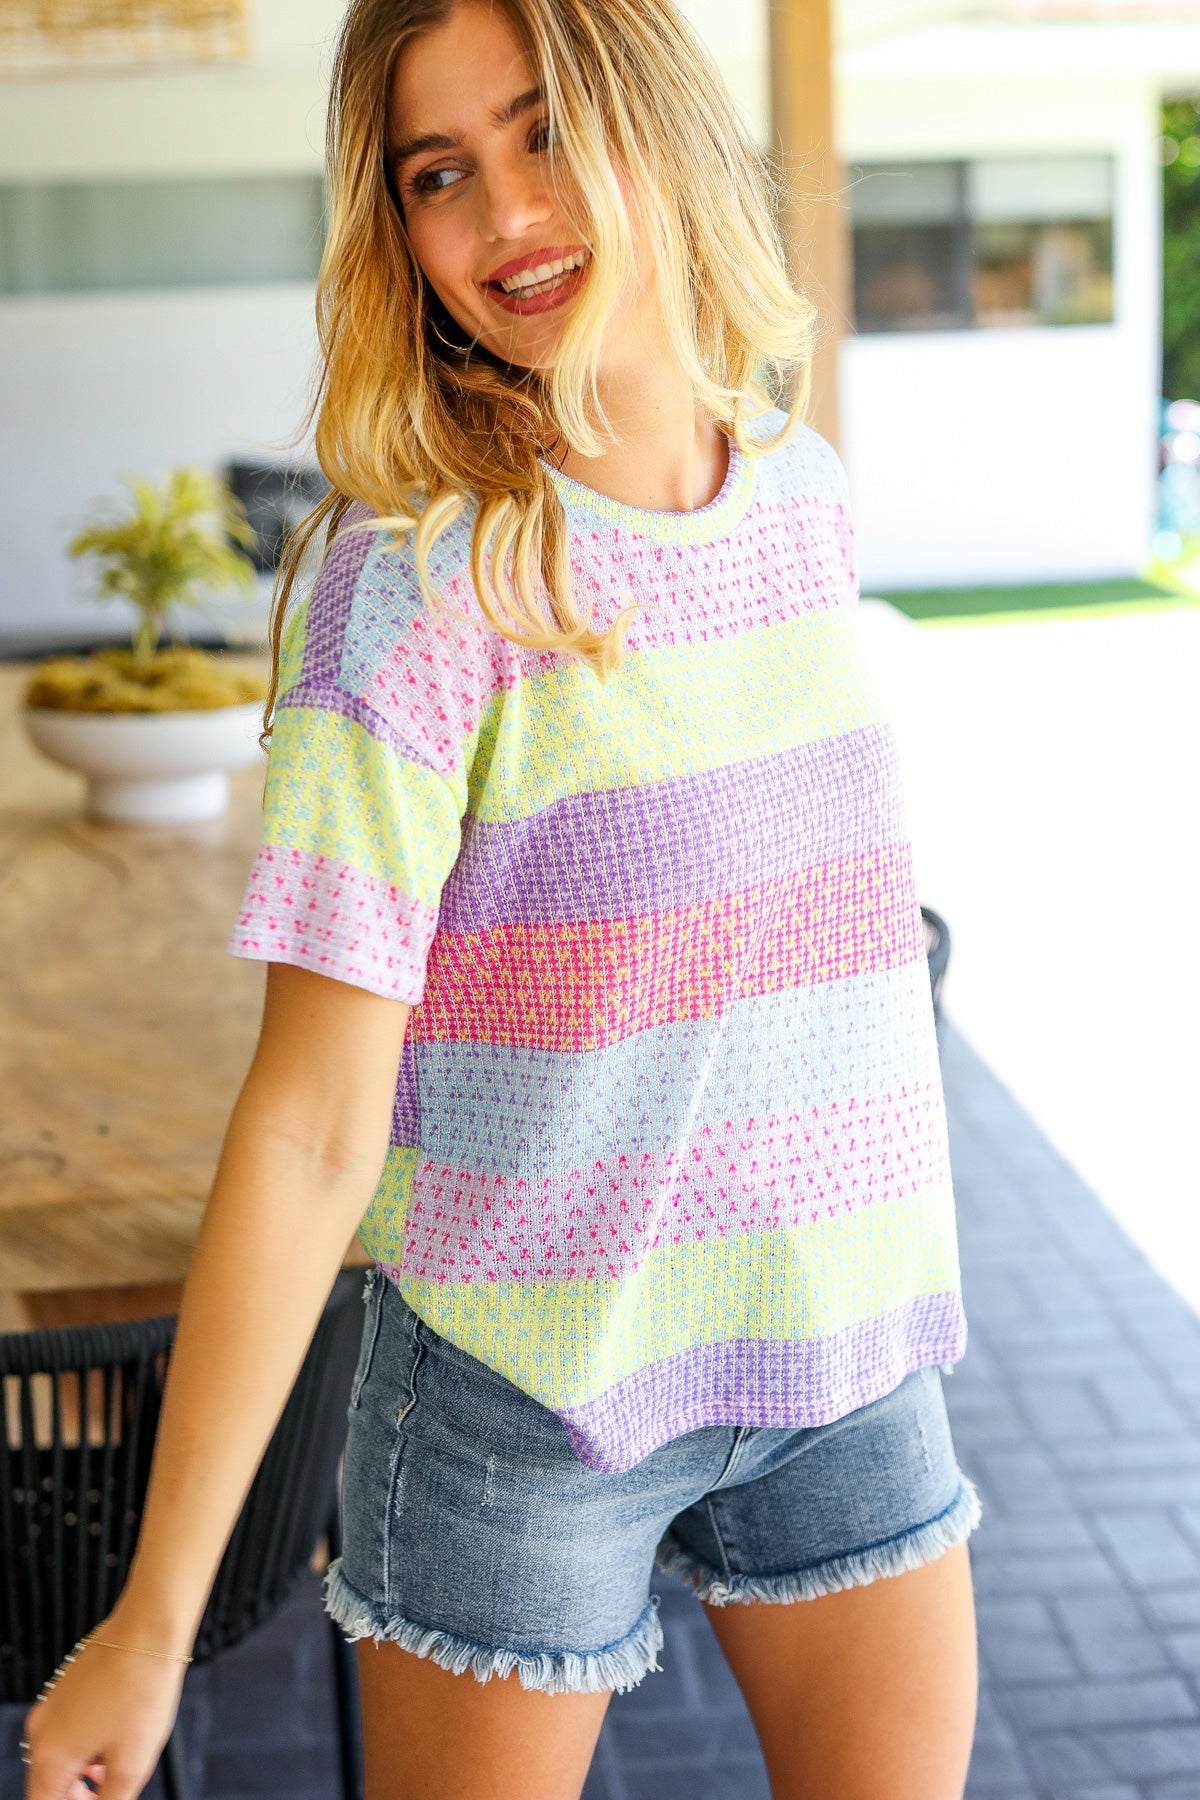 Stand Out Lavender & Pink Striped Textured Waffle Knit Top Haptics